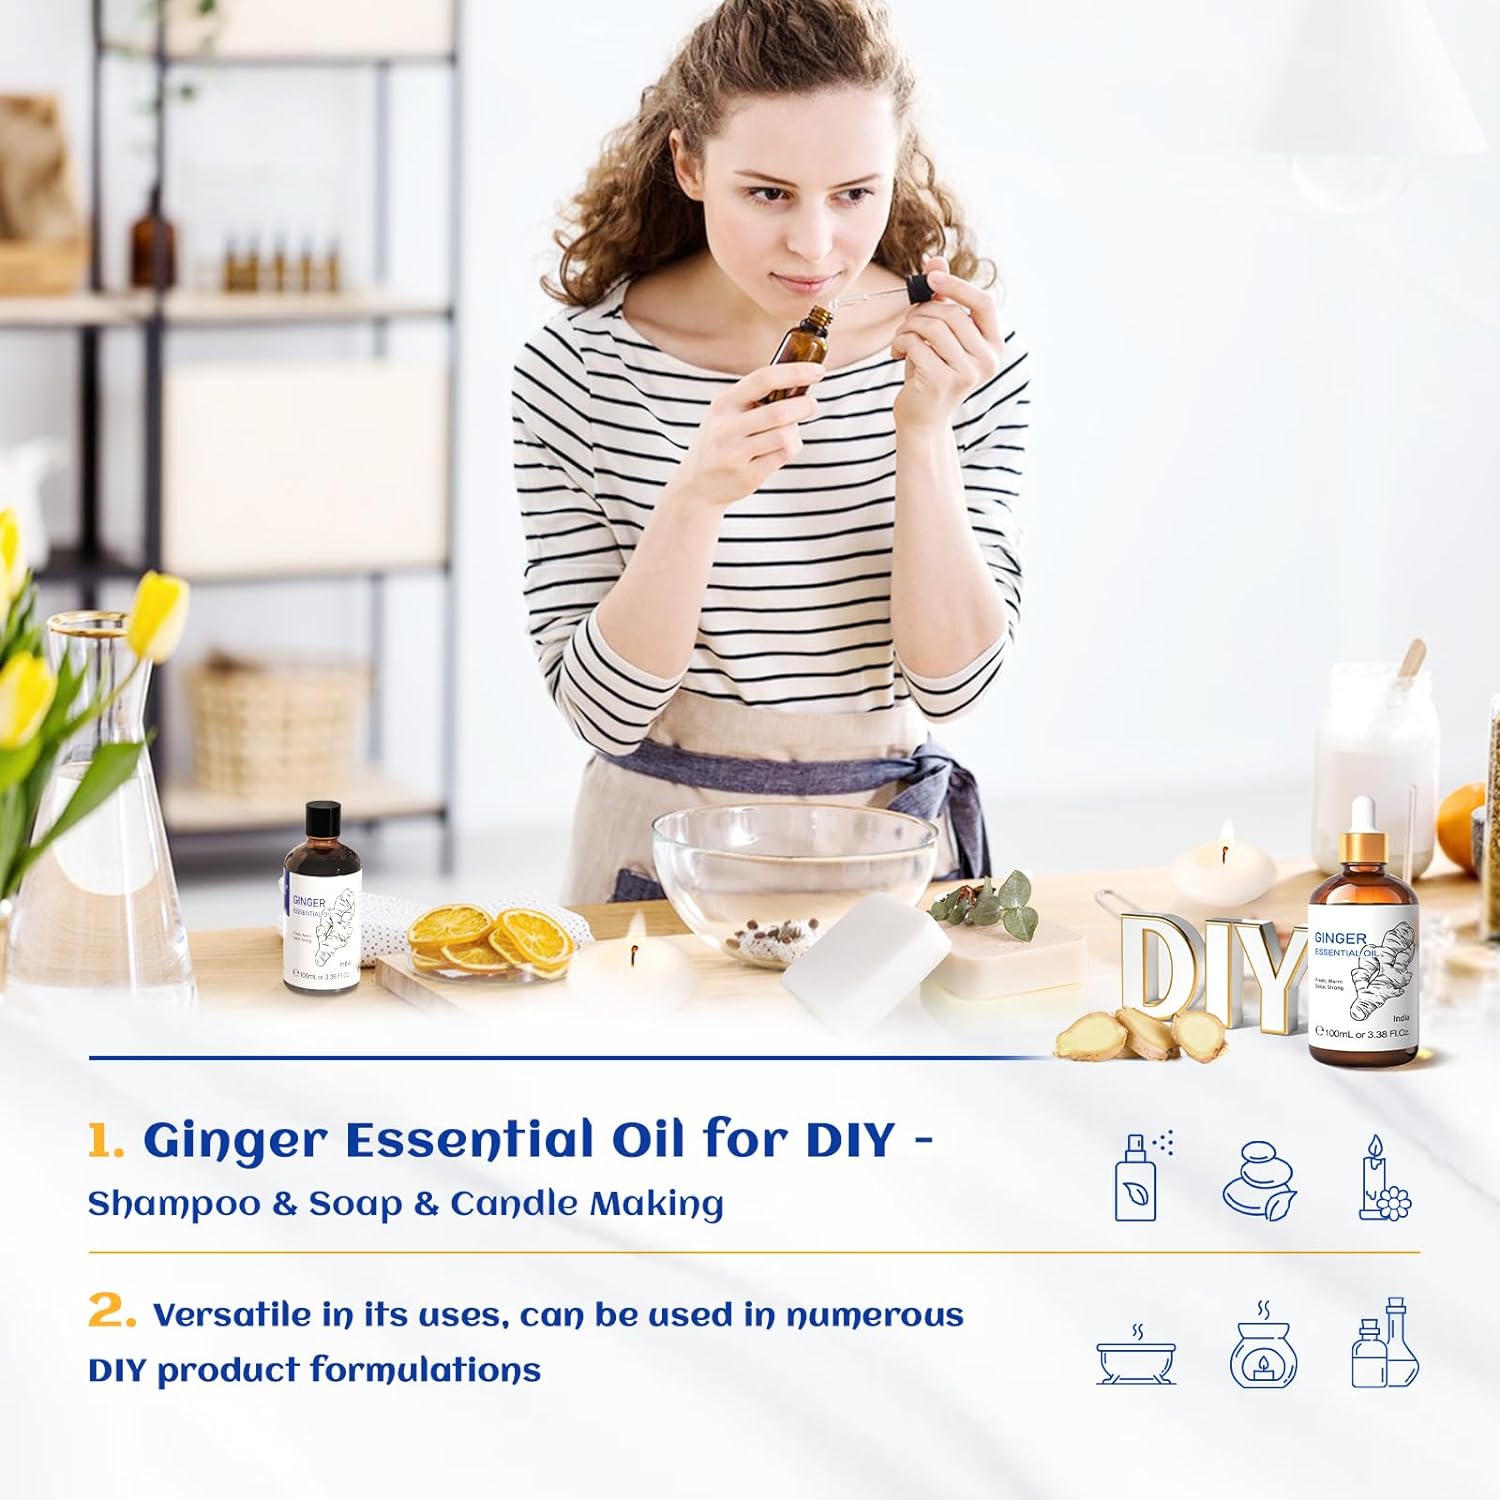 HIQILI Pure Ginger Essential Oil 3.38 Fl Oz, Pure Natural Premium Ginger Oil for Massage, Diffuser, Large Bottle with Dropper & Gift Box -100ml : Health & Household